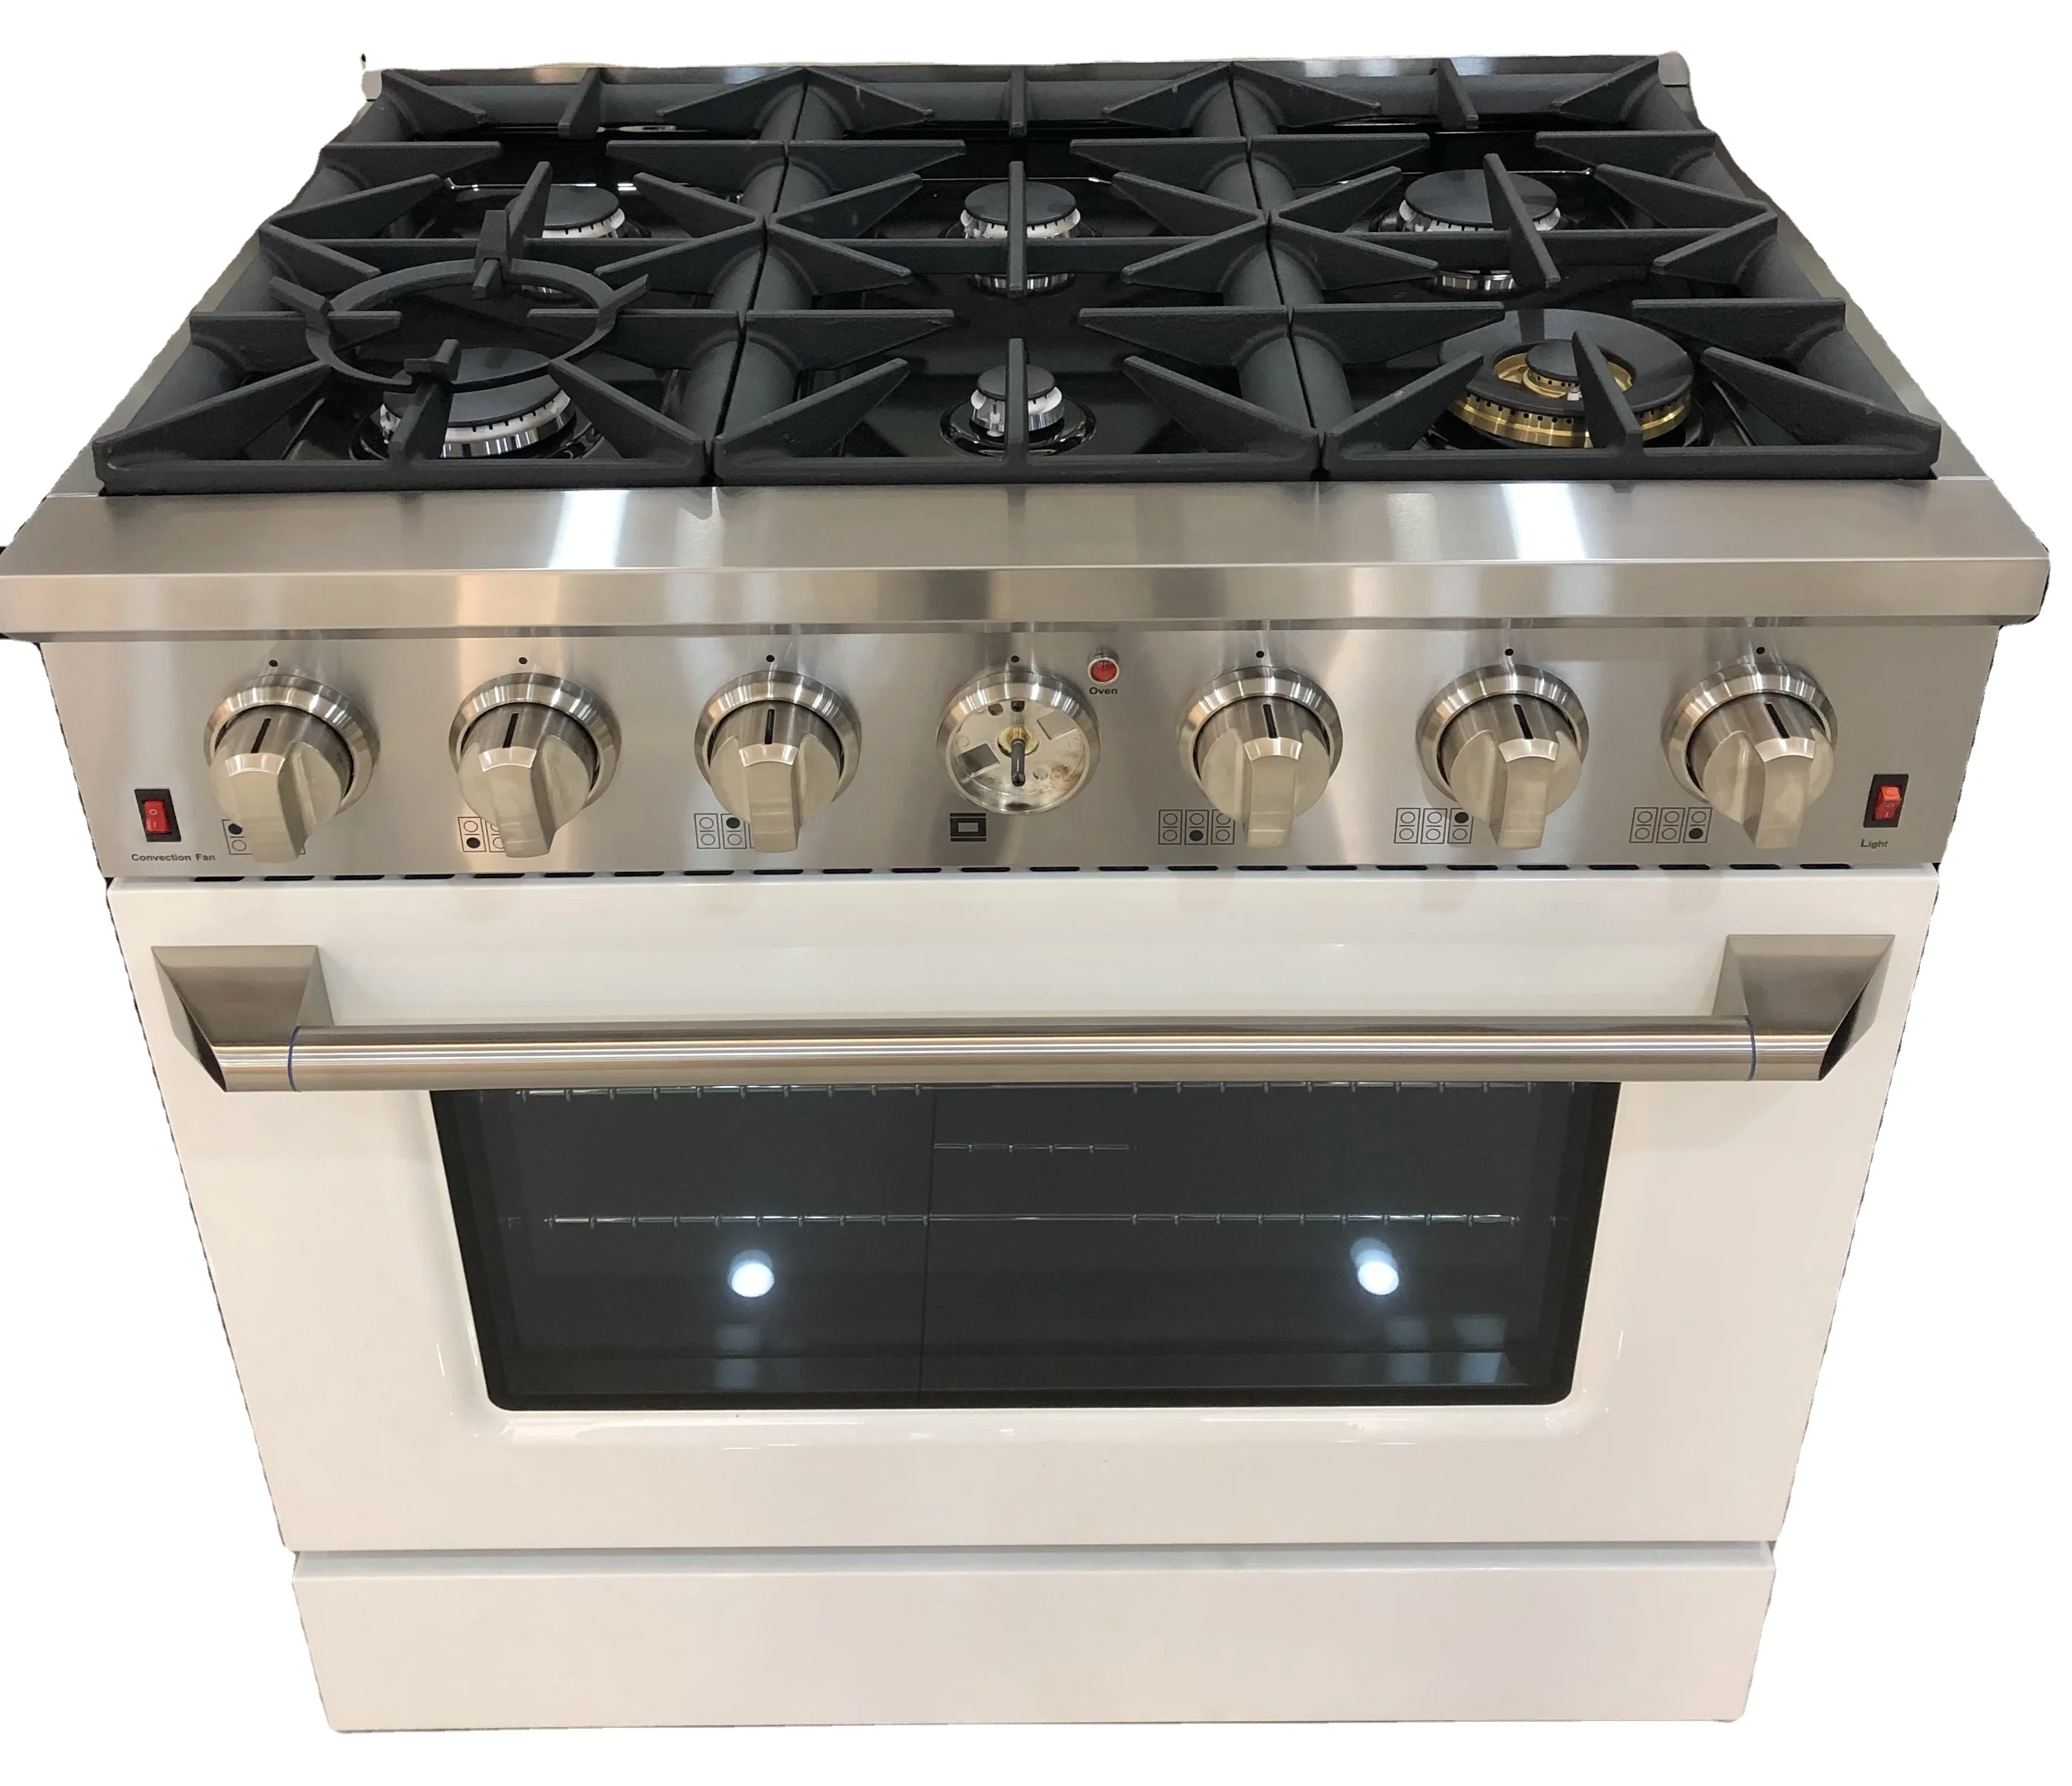 Full stainless steel free standing gas RANGE with auto ignition